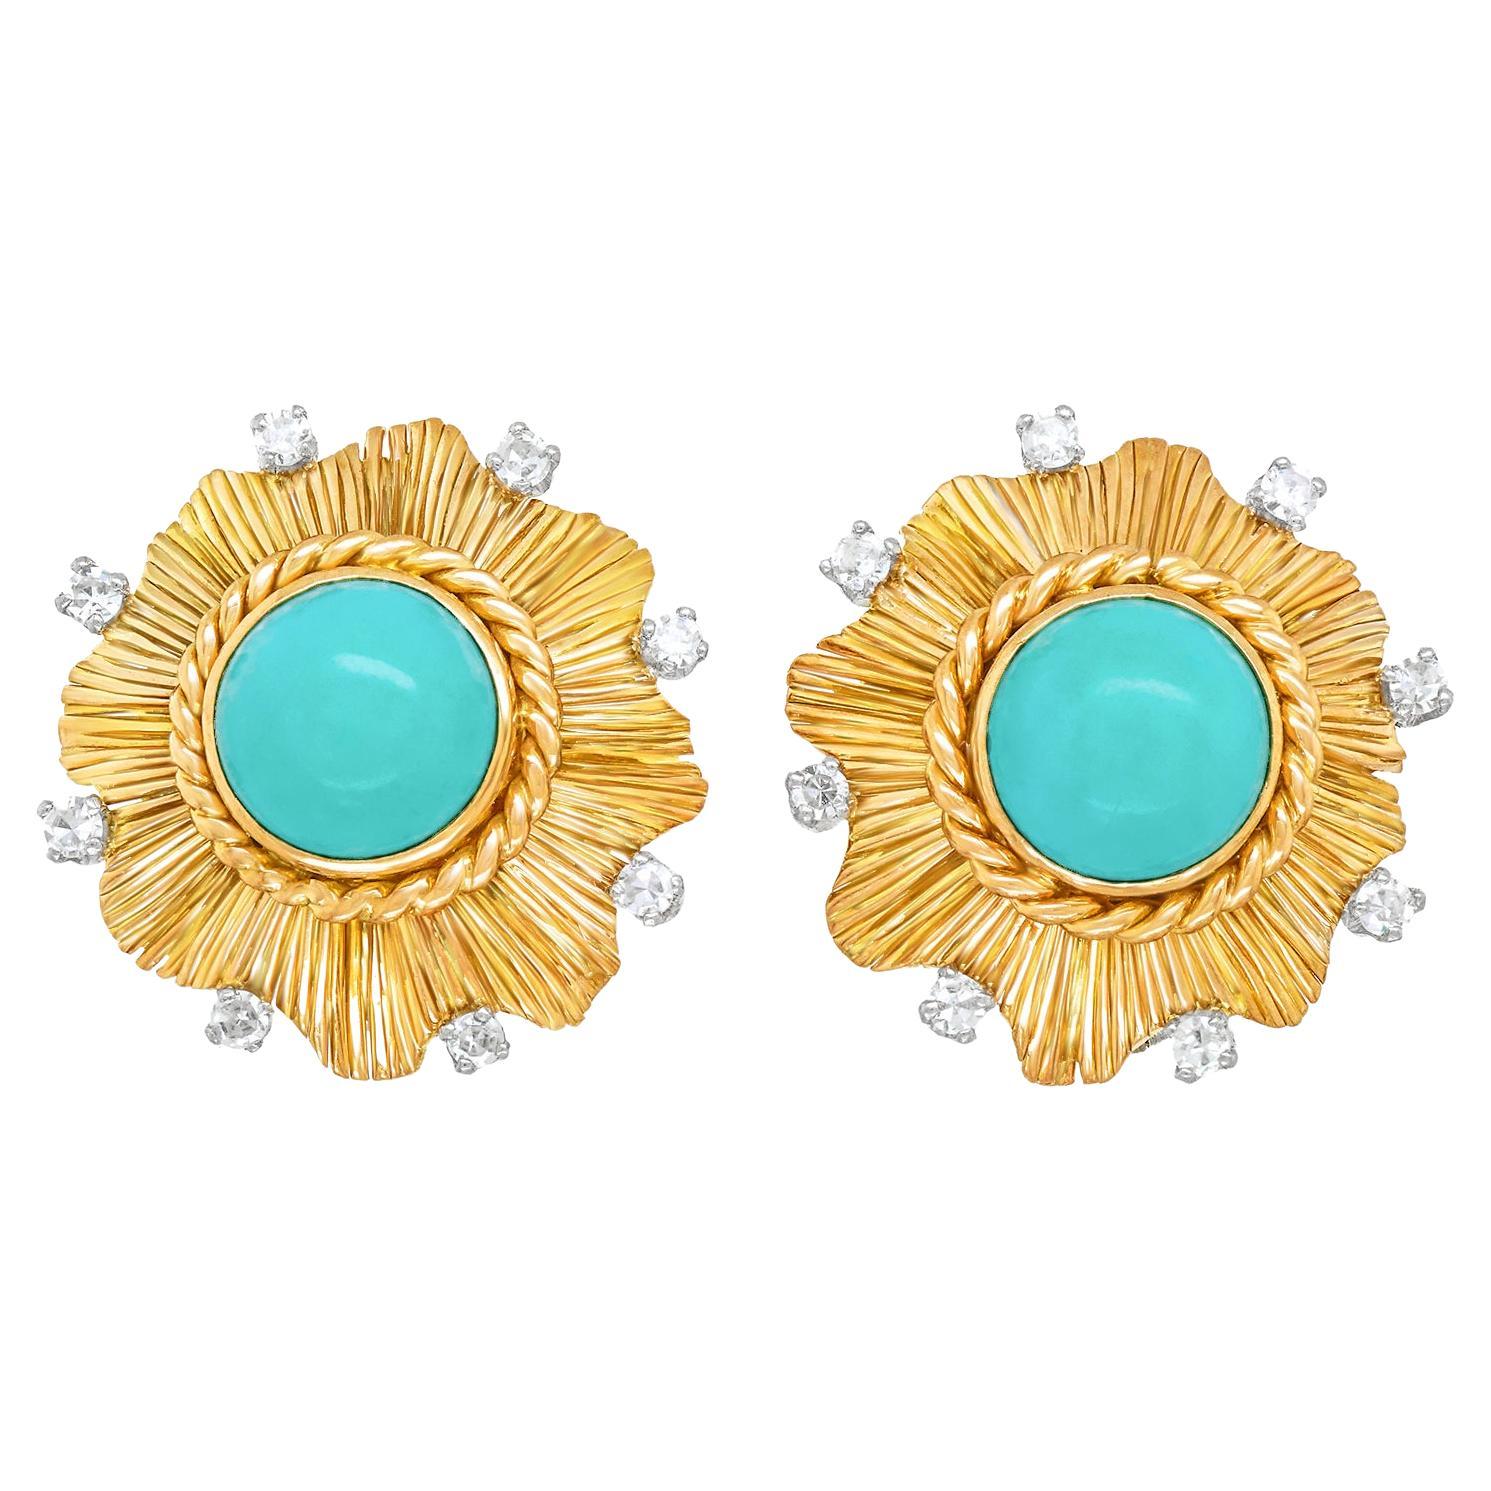 Art Deco Turquoise and Gold Earrings